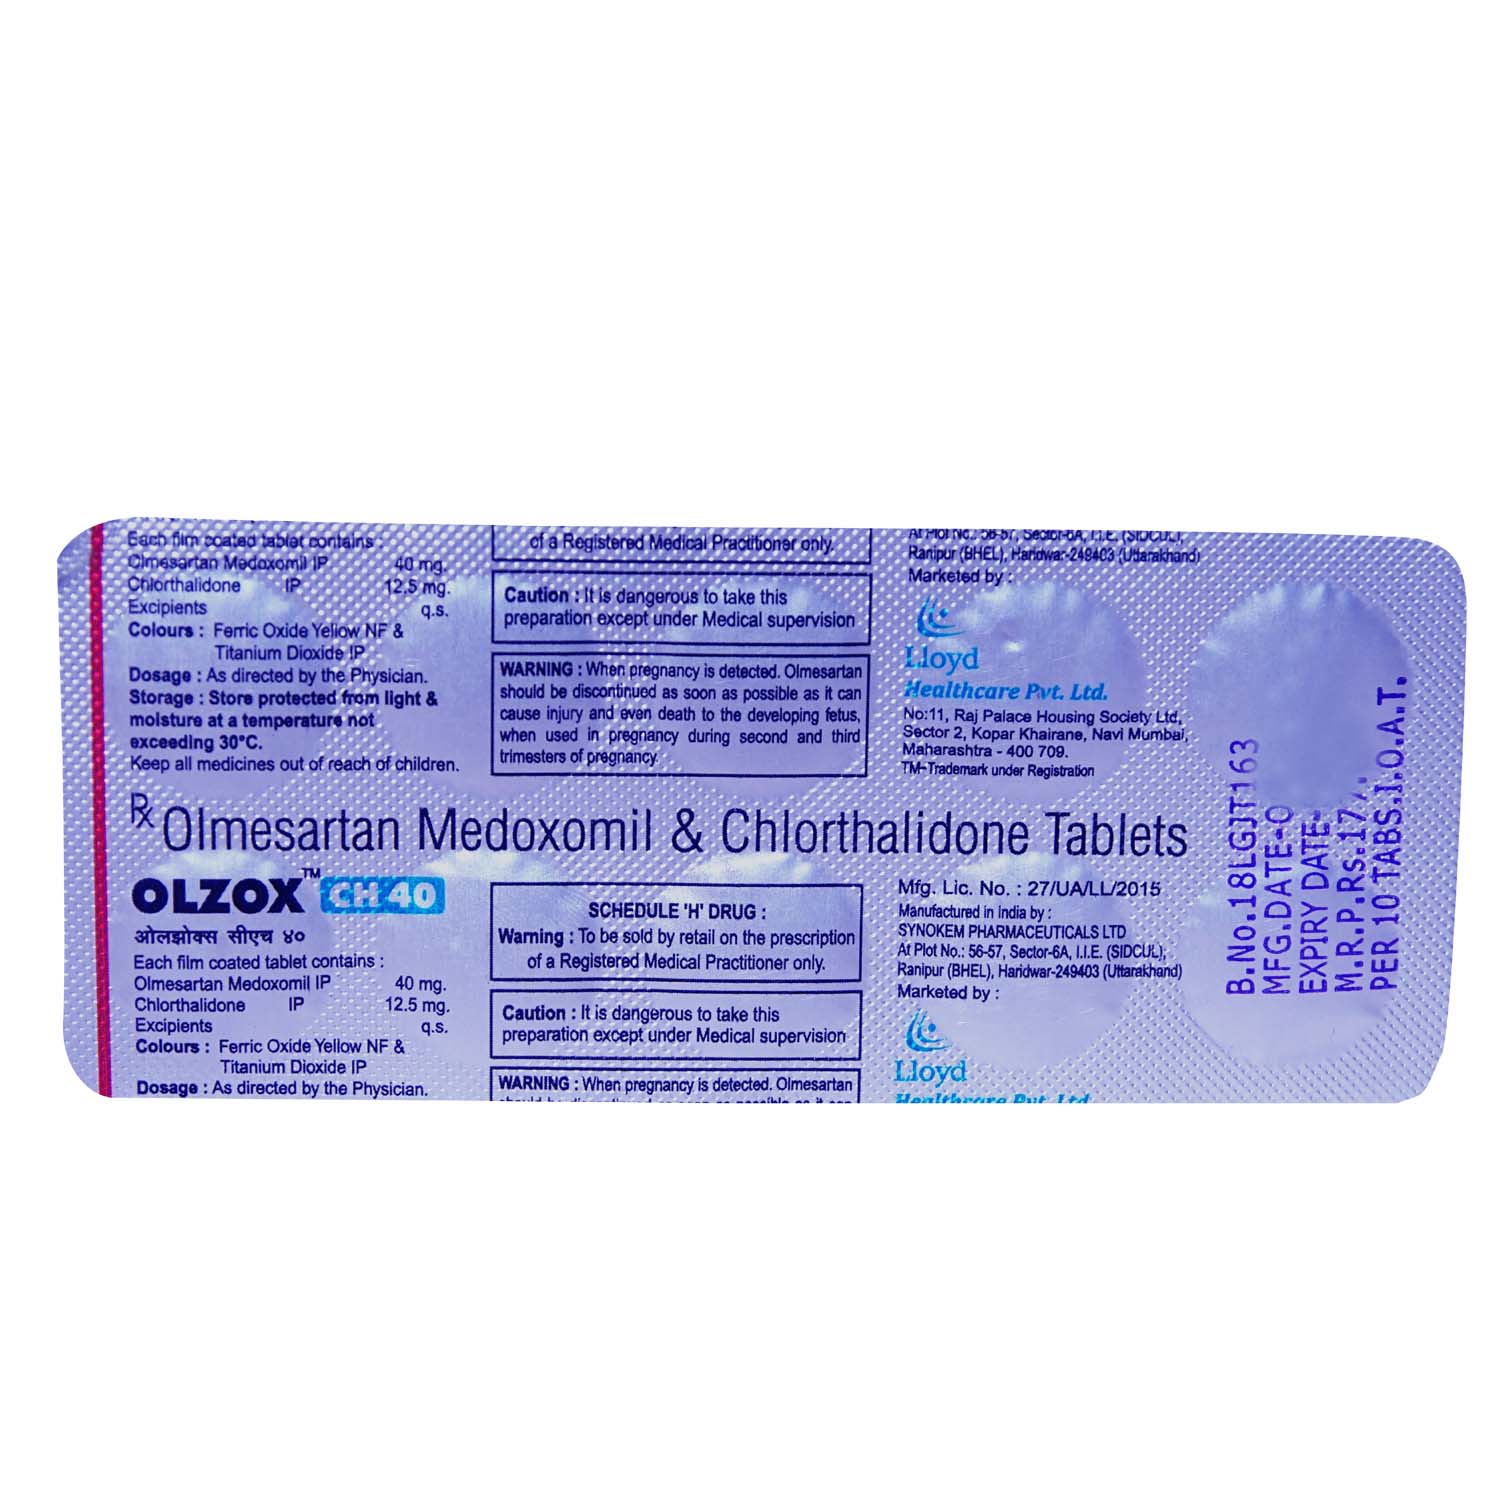 Olzox CH 40 Tablet 10's, Pack of 10 TABLETS